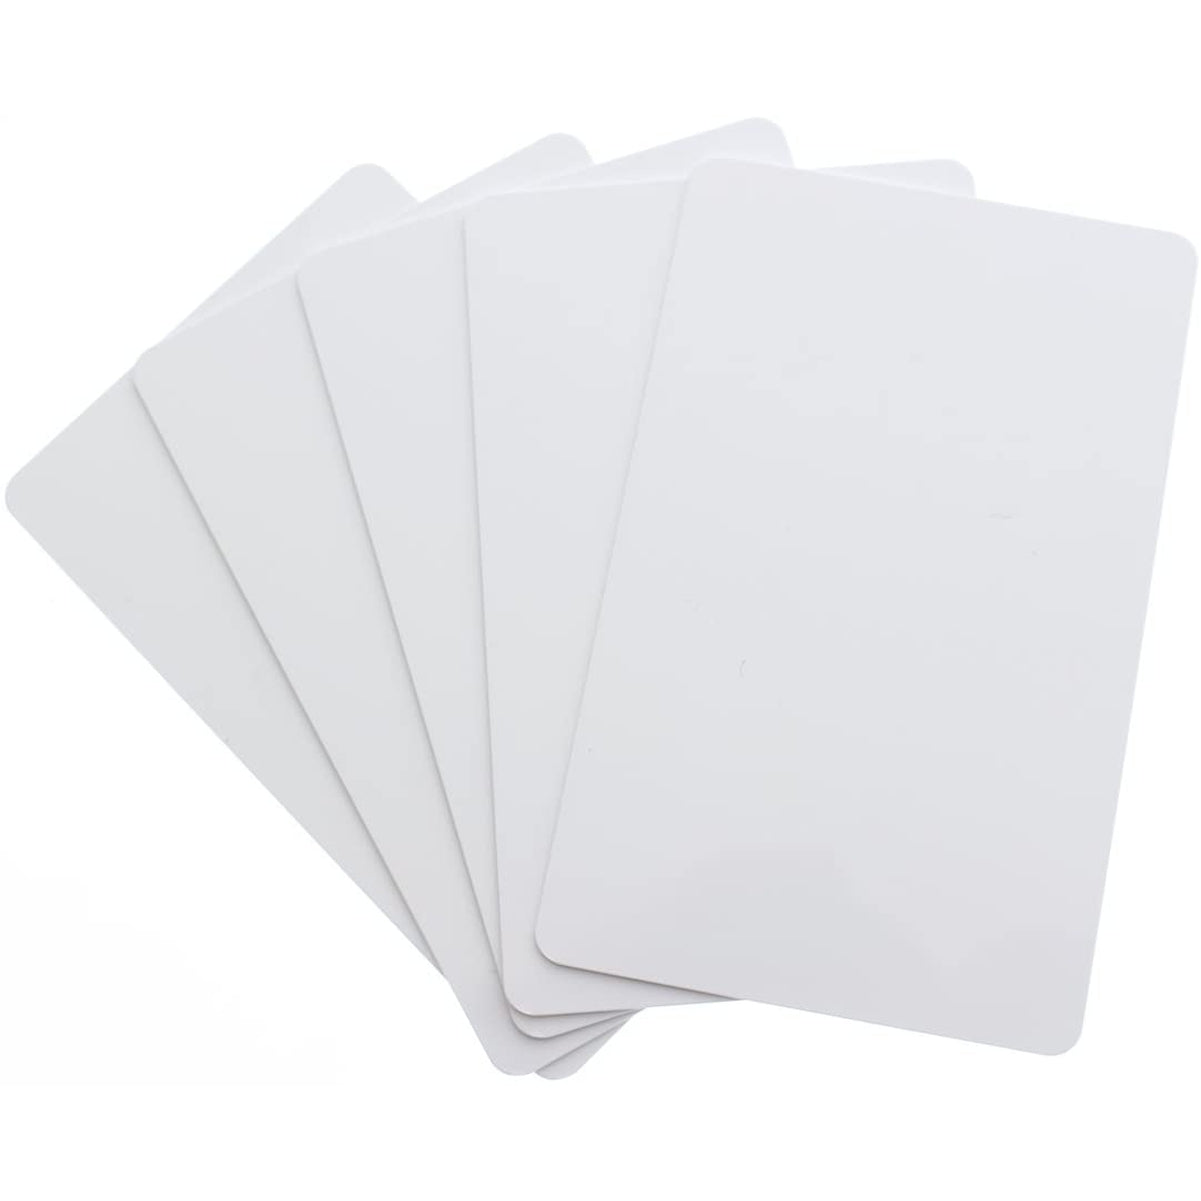 Six Premium Blank PVC Cards for ID Badge Printers - Graphic Quality CR80 30 Mil (CR80), white, rectangular cards fanned out slightly overlapping.